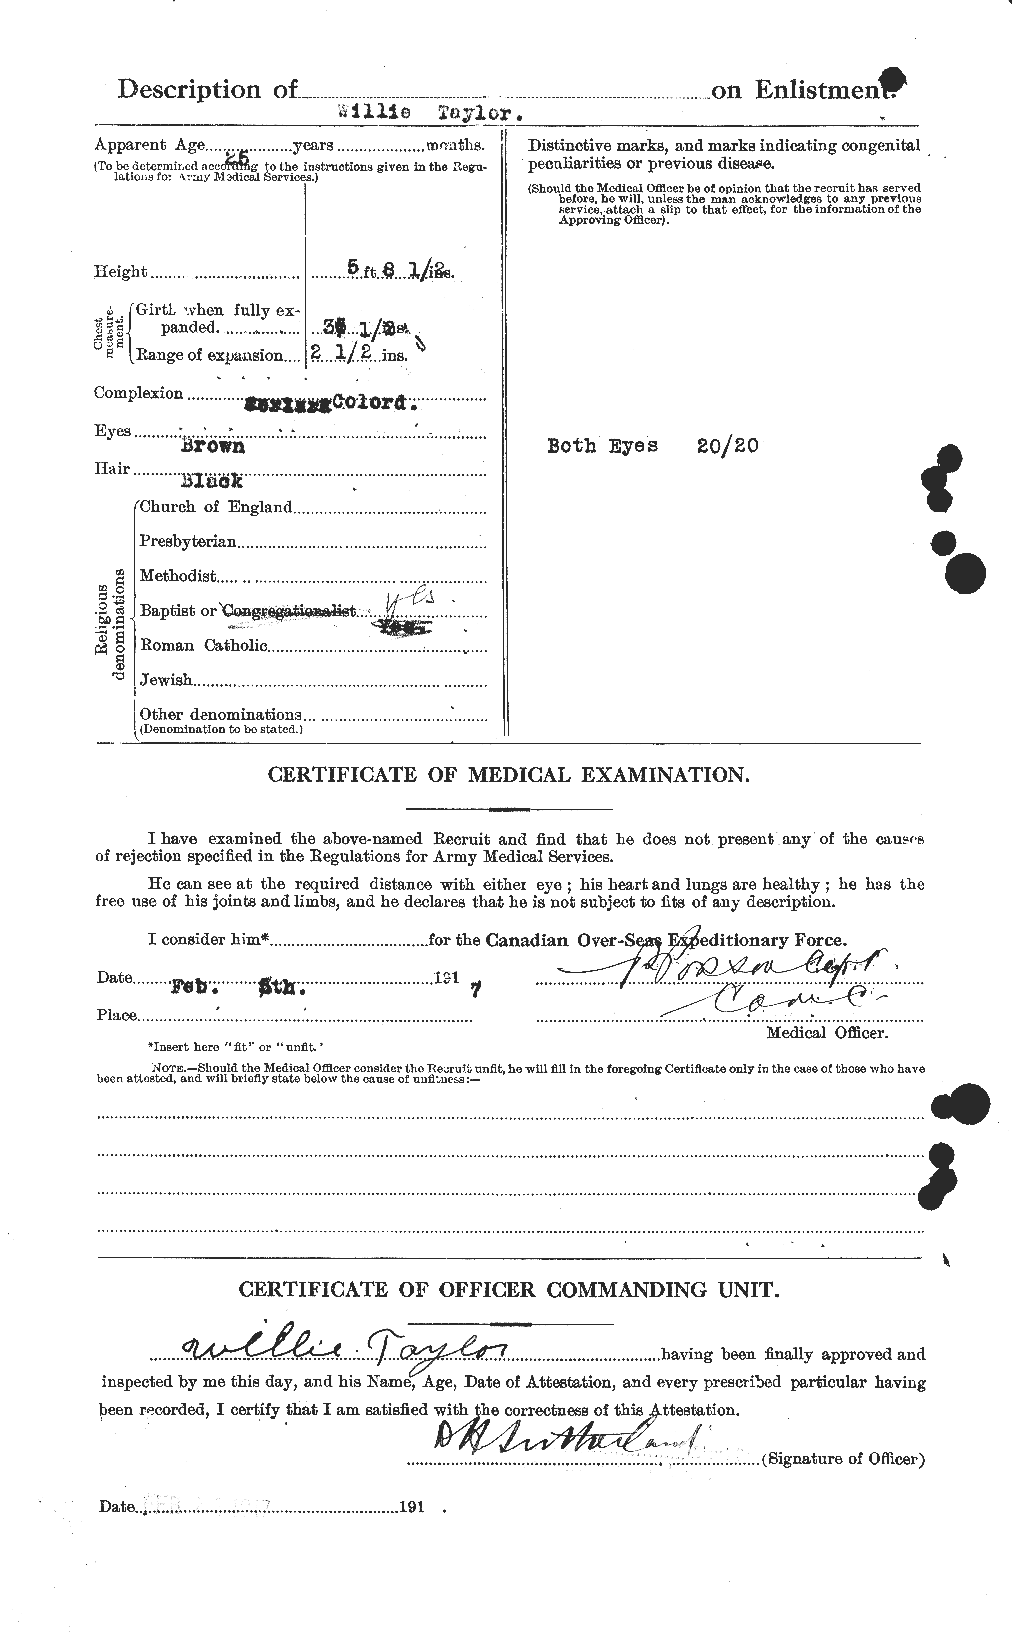 Personnel Records of the First World War - CEF 628369b